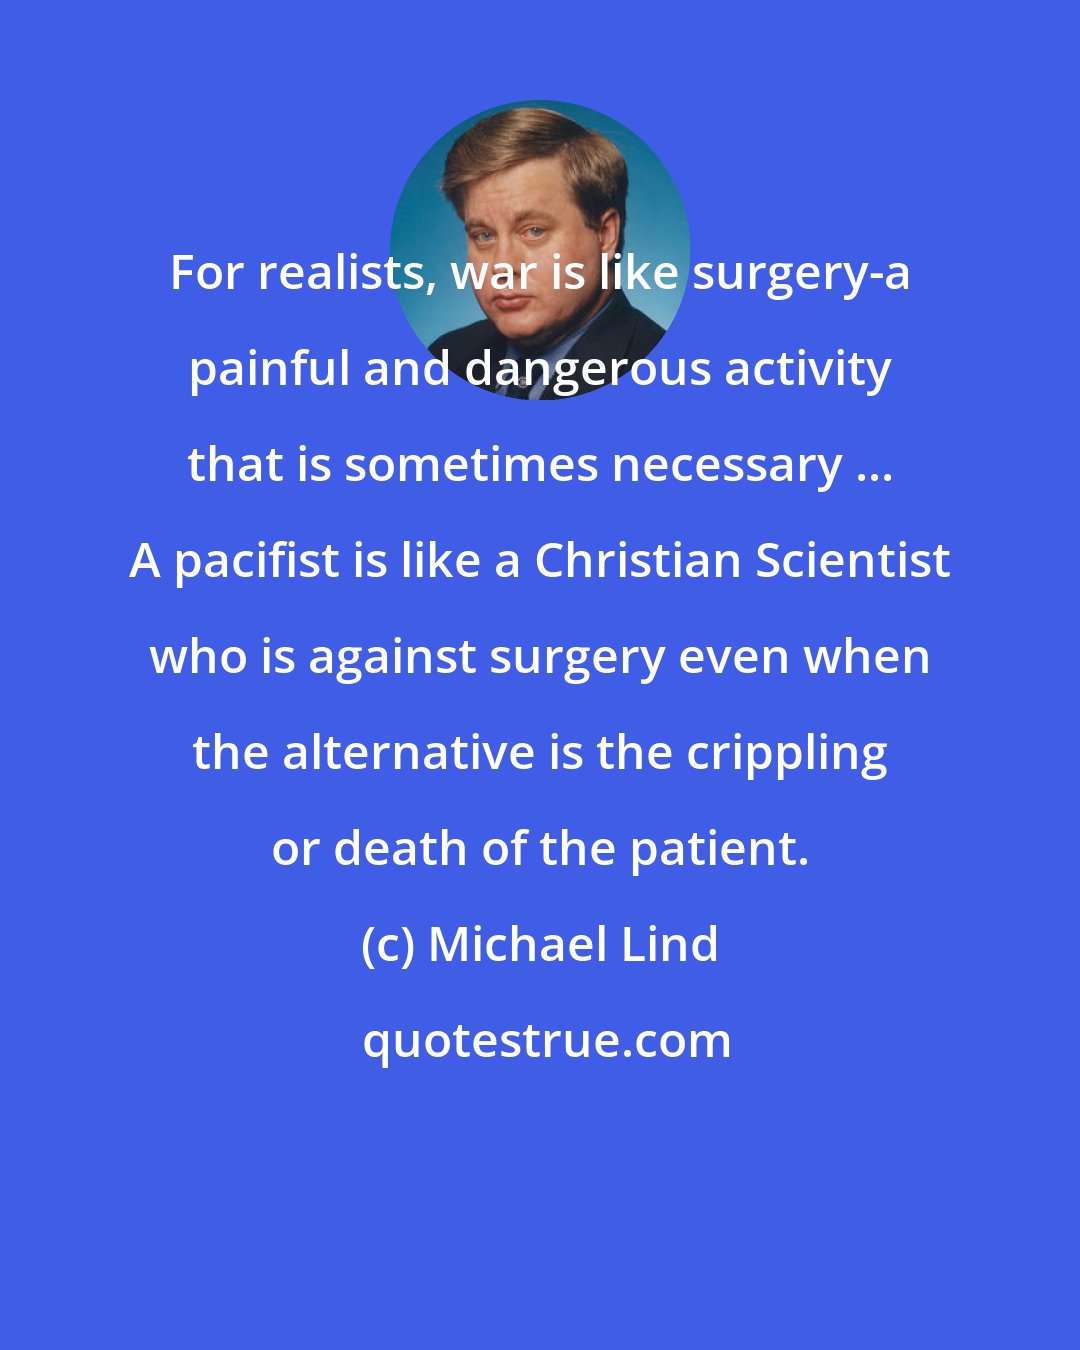 Michael Lind: For realists, war is like surgery-a painful and dangerous activity that is sometimes necessary ... A pacifist is like a Christian Scientist who is against surgery even when the alternative is the crippling or death of the patient.